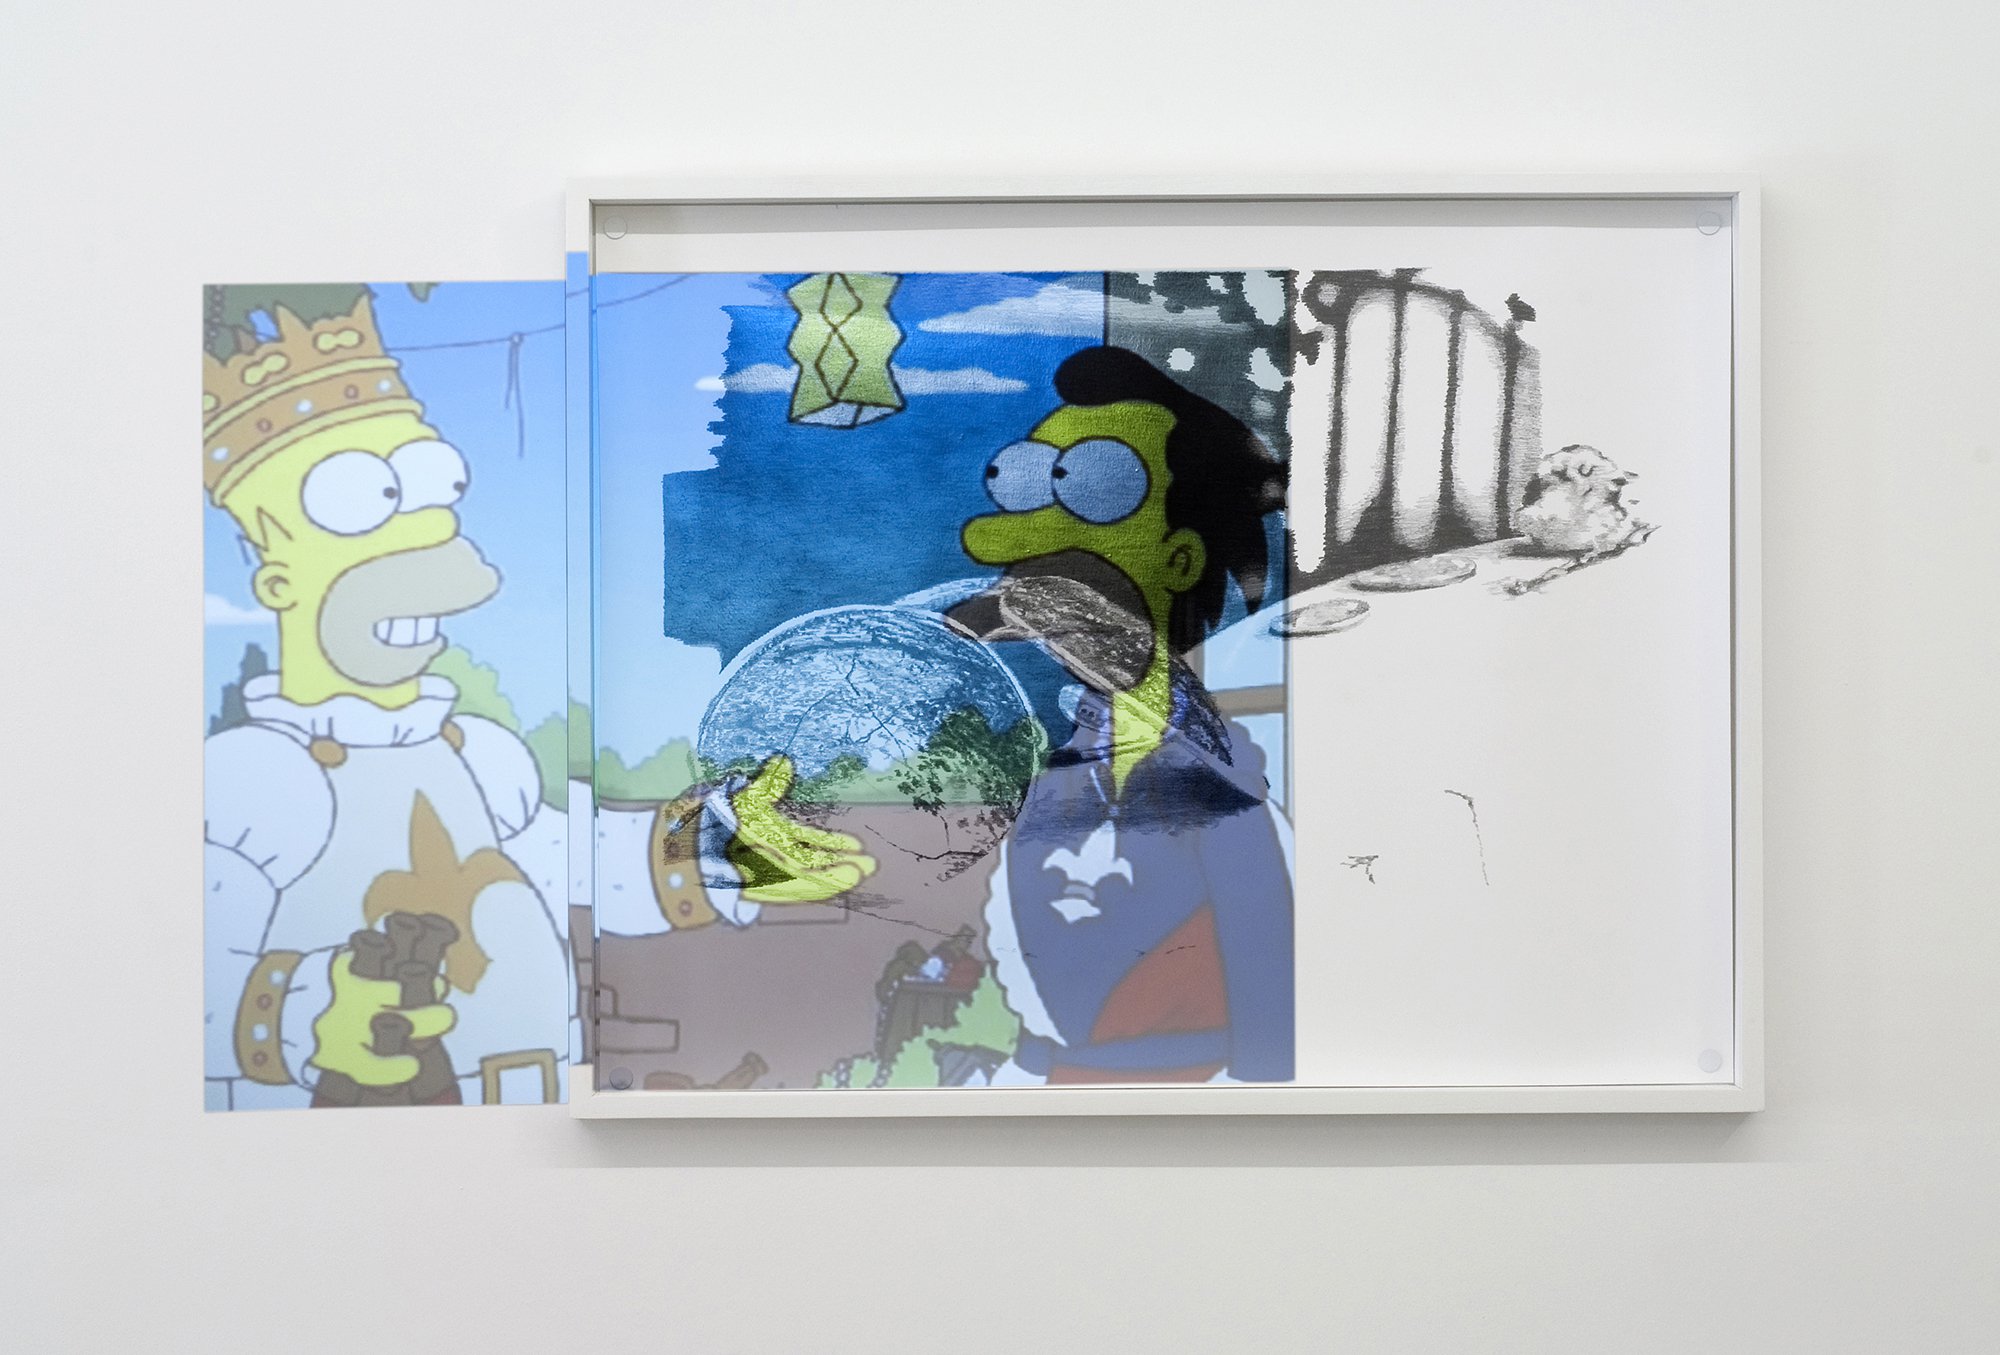 Mark Aerial Waller, Offering Transmissions #5, graphite on paper, projection of recent episode of The Simpsons, 100.5 x 78.5 cm (39 5/8 x 30 7/8 in), 2011 – 2012